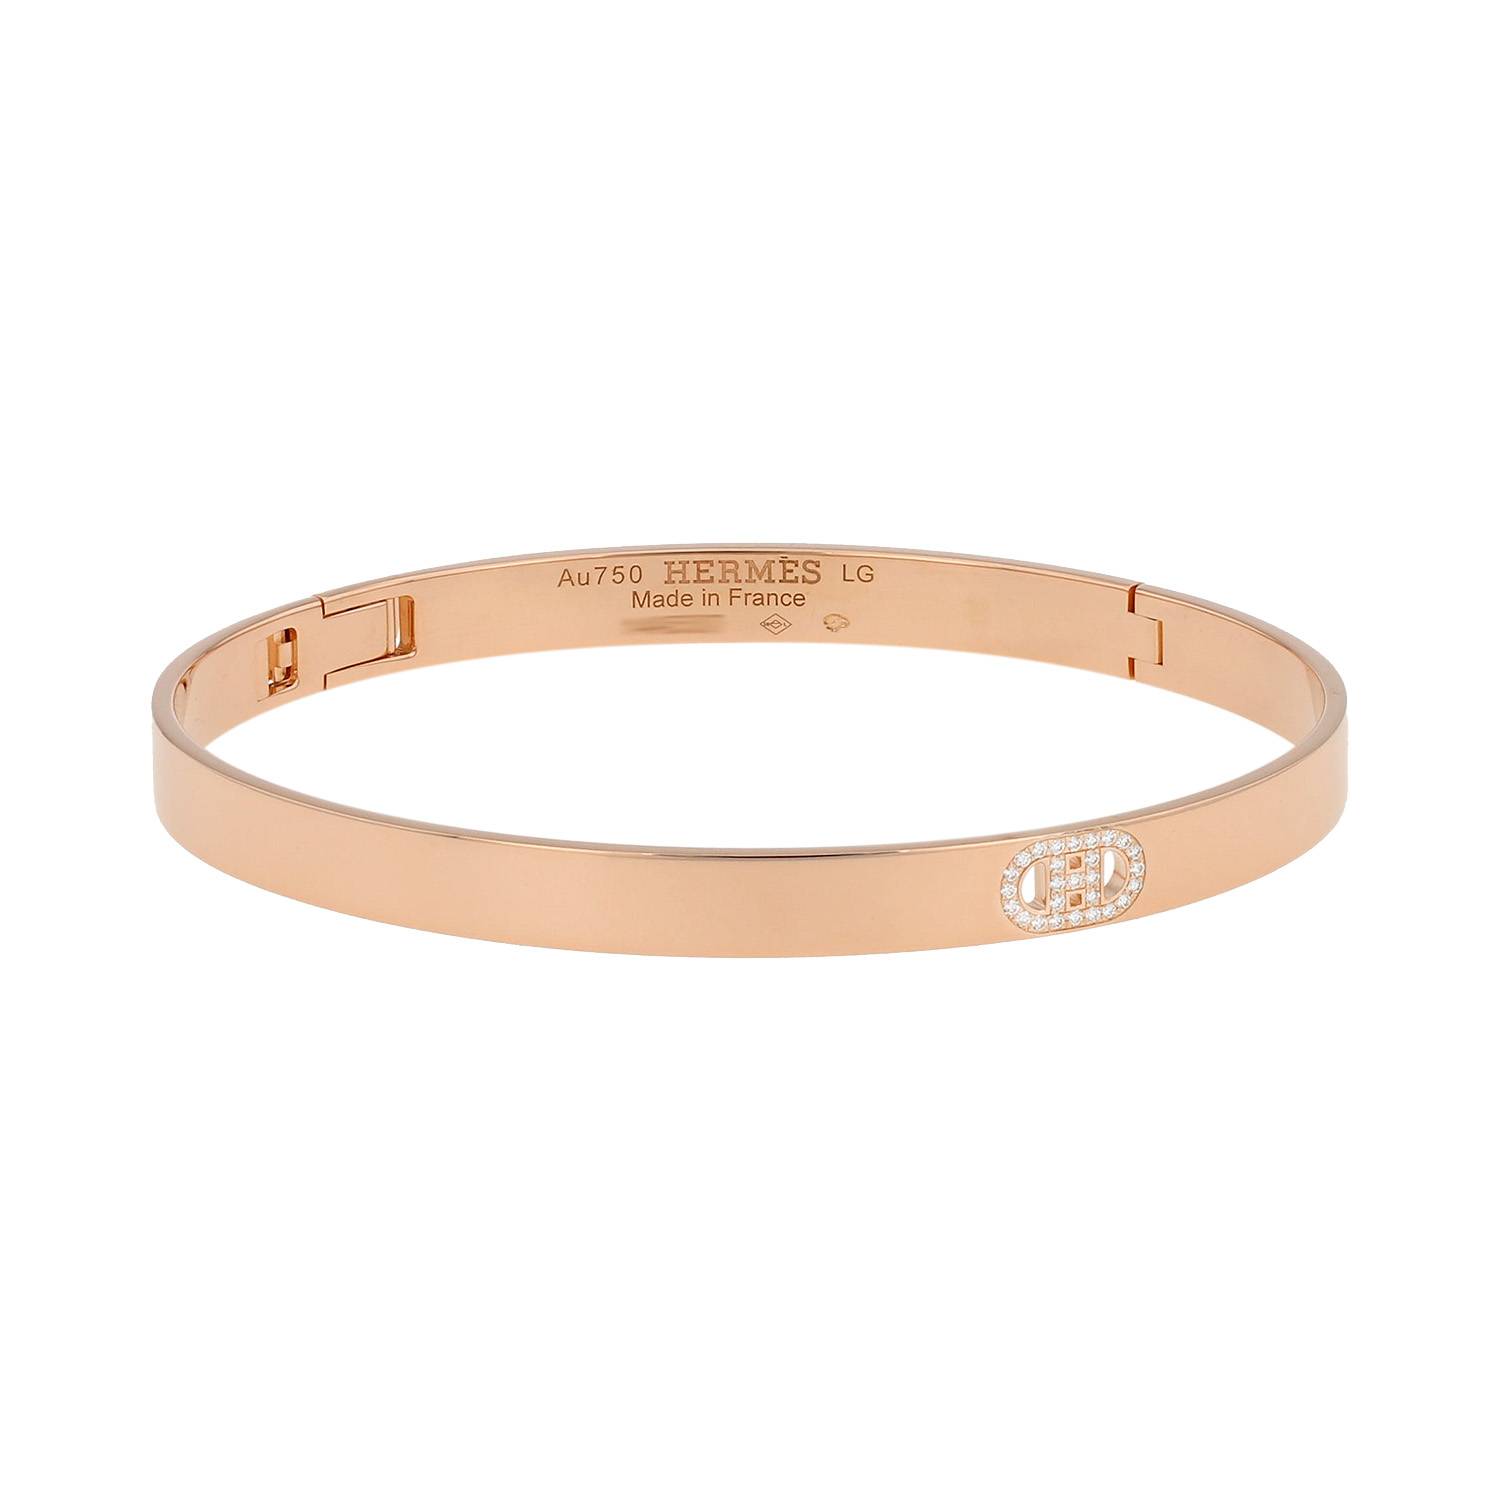 H D'ancre Bracelet In Pink And Diamonds